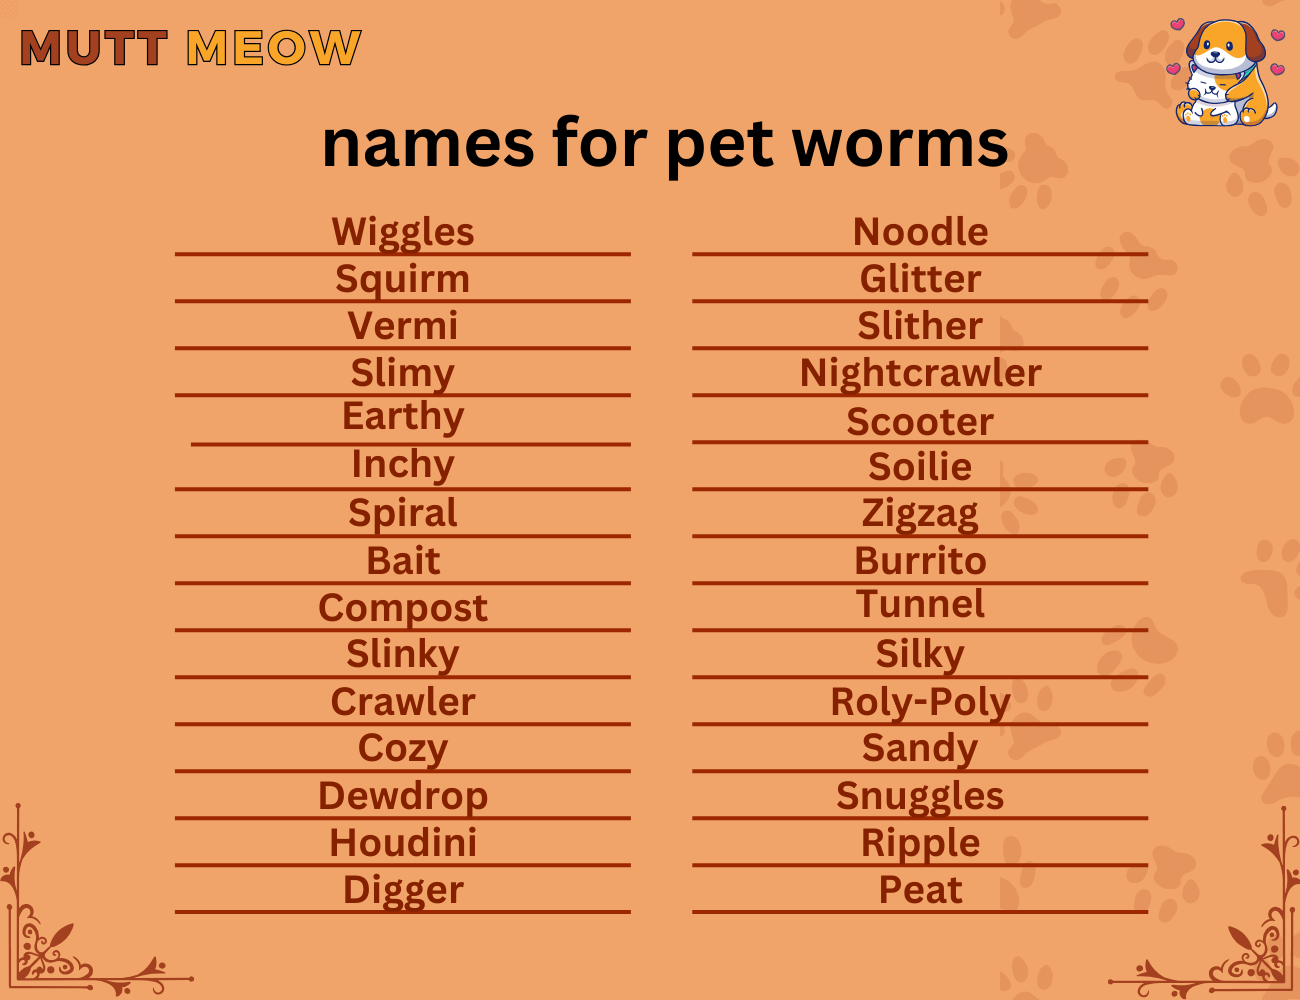 names for pet worms